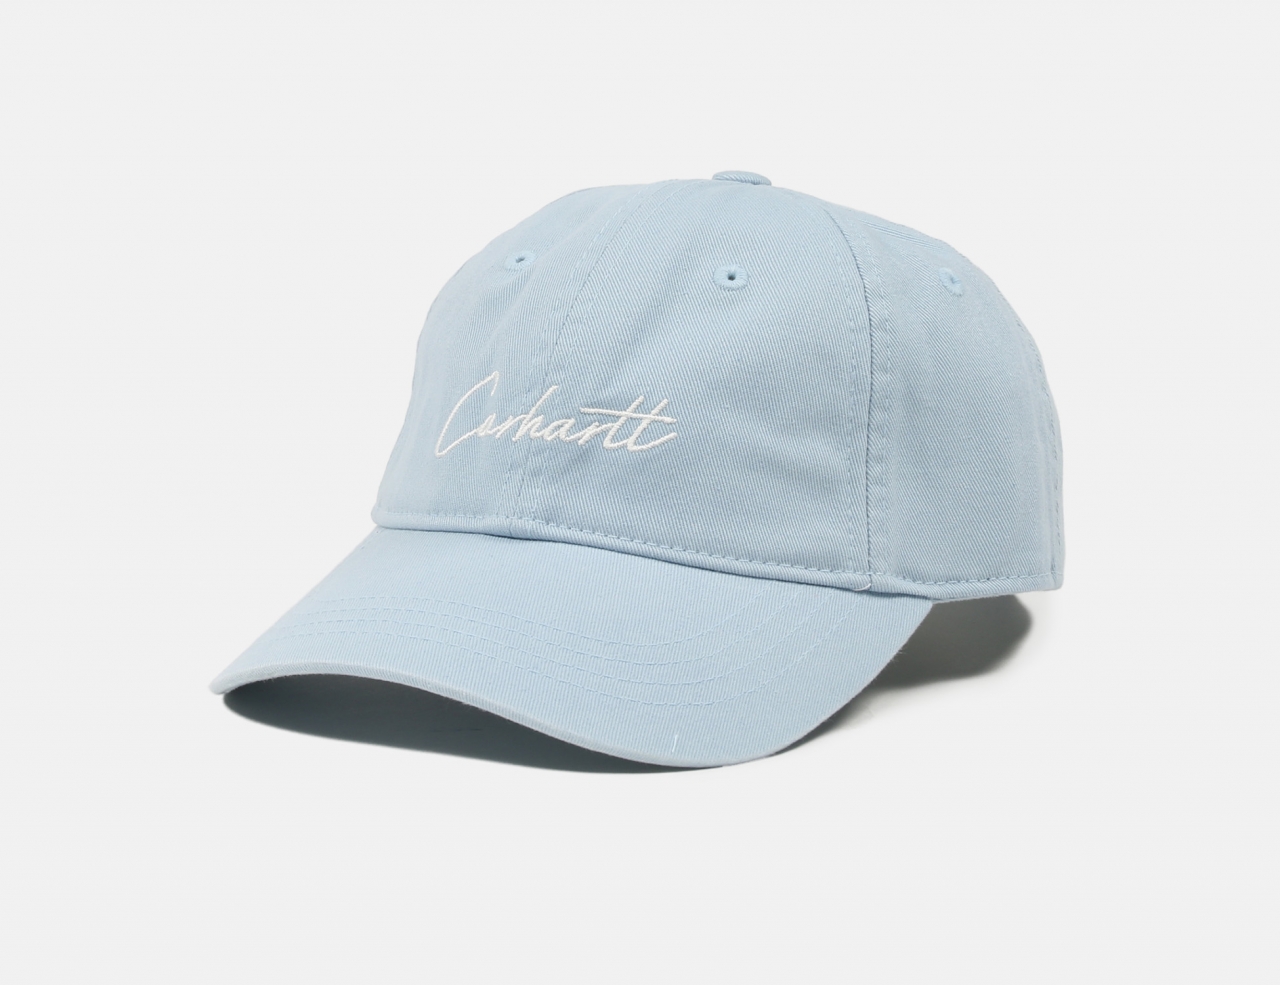 Carhartt WIP Delray Cap - Frosted Blue / Wax